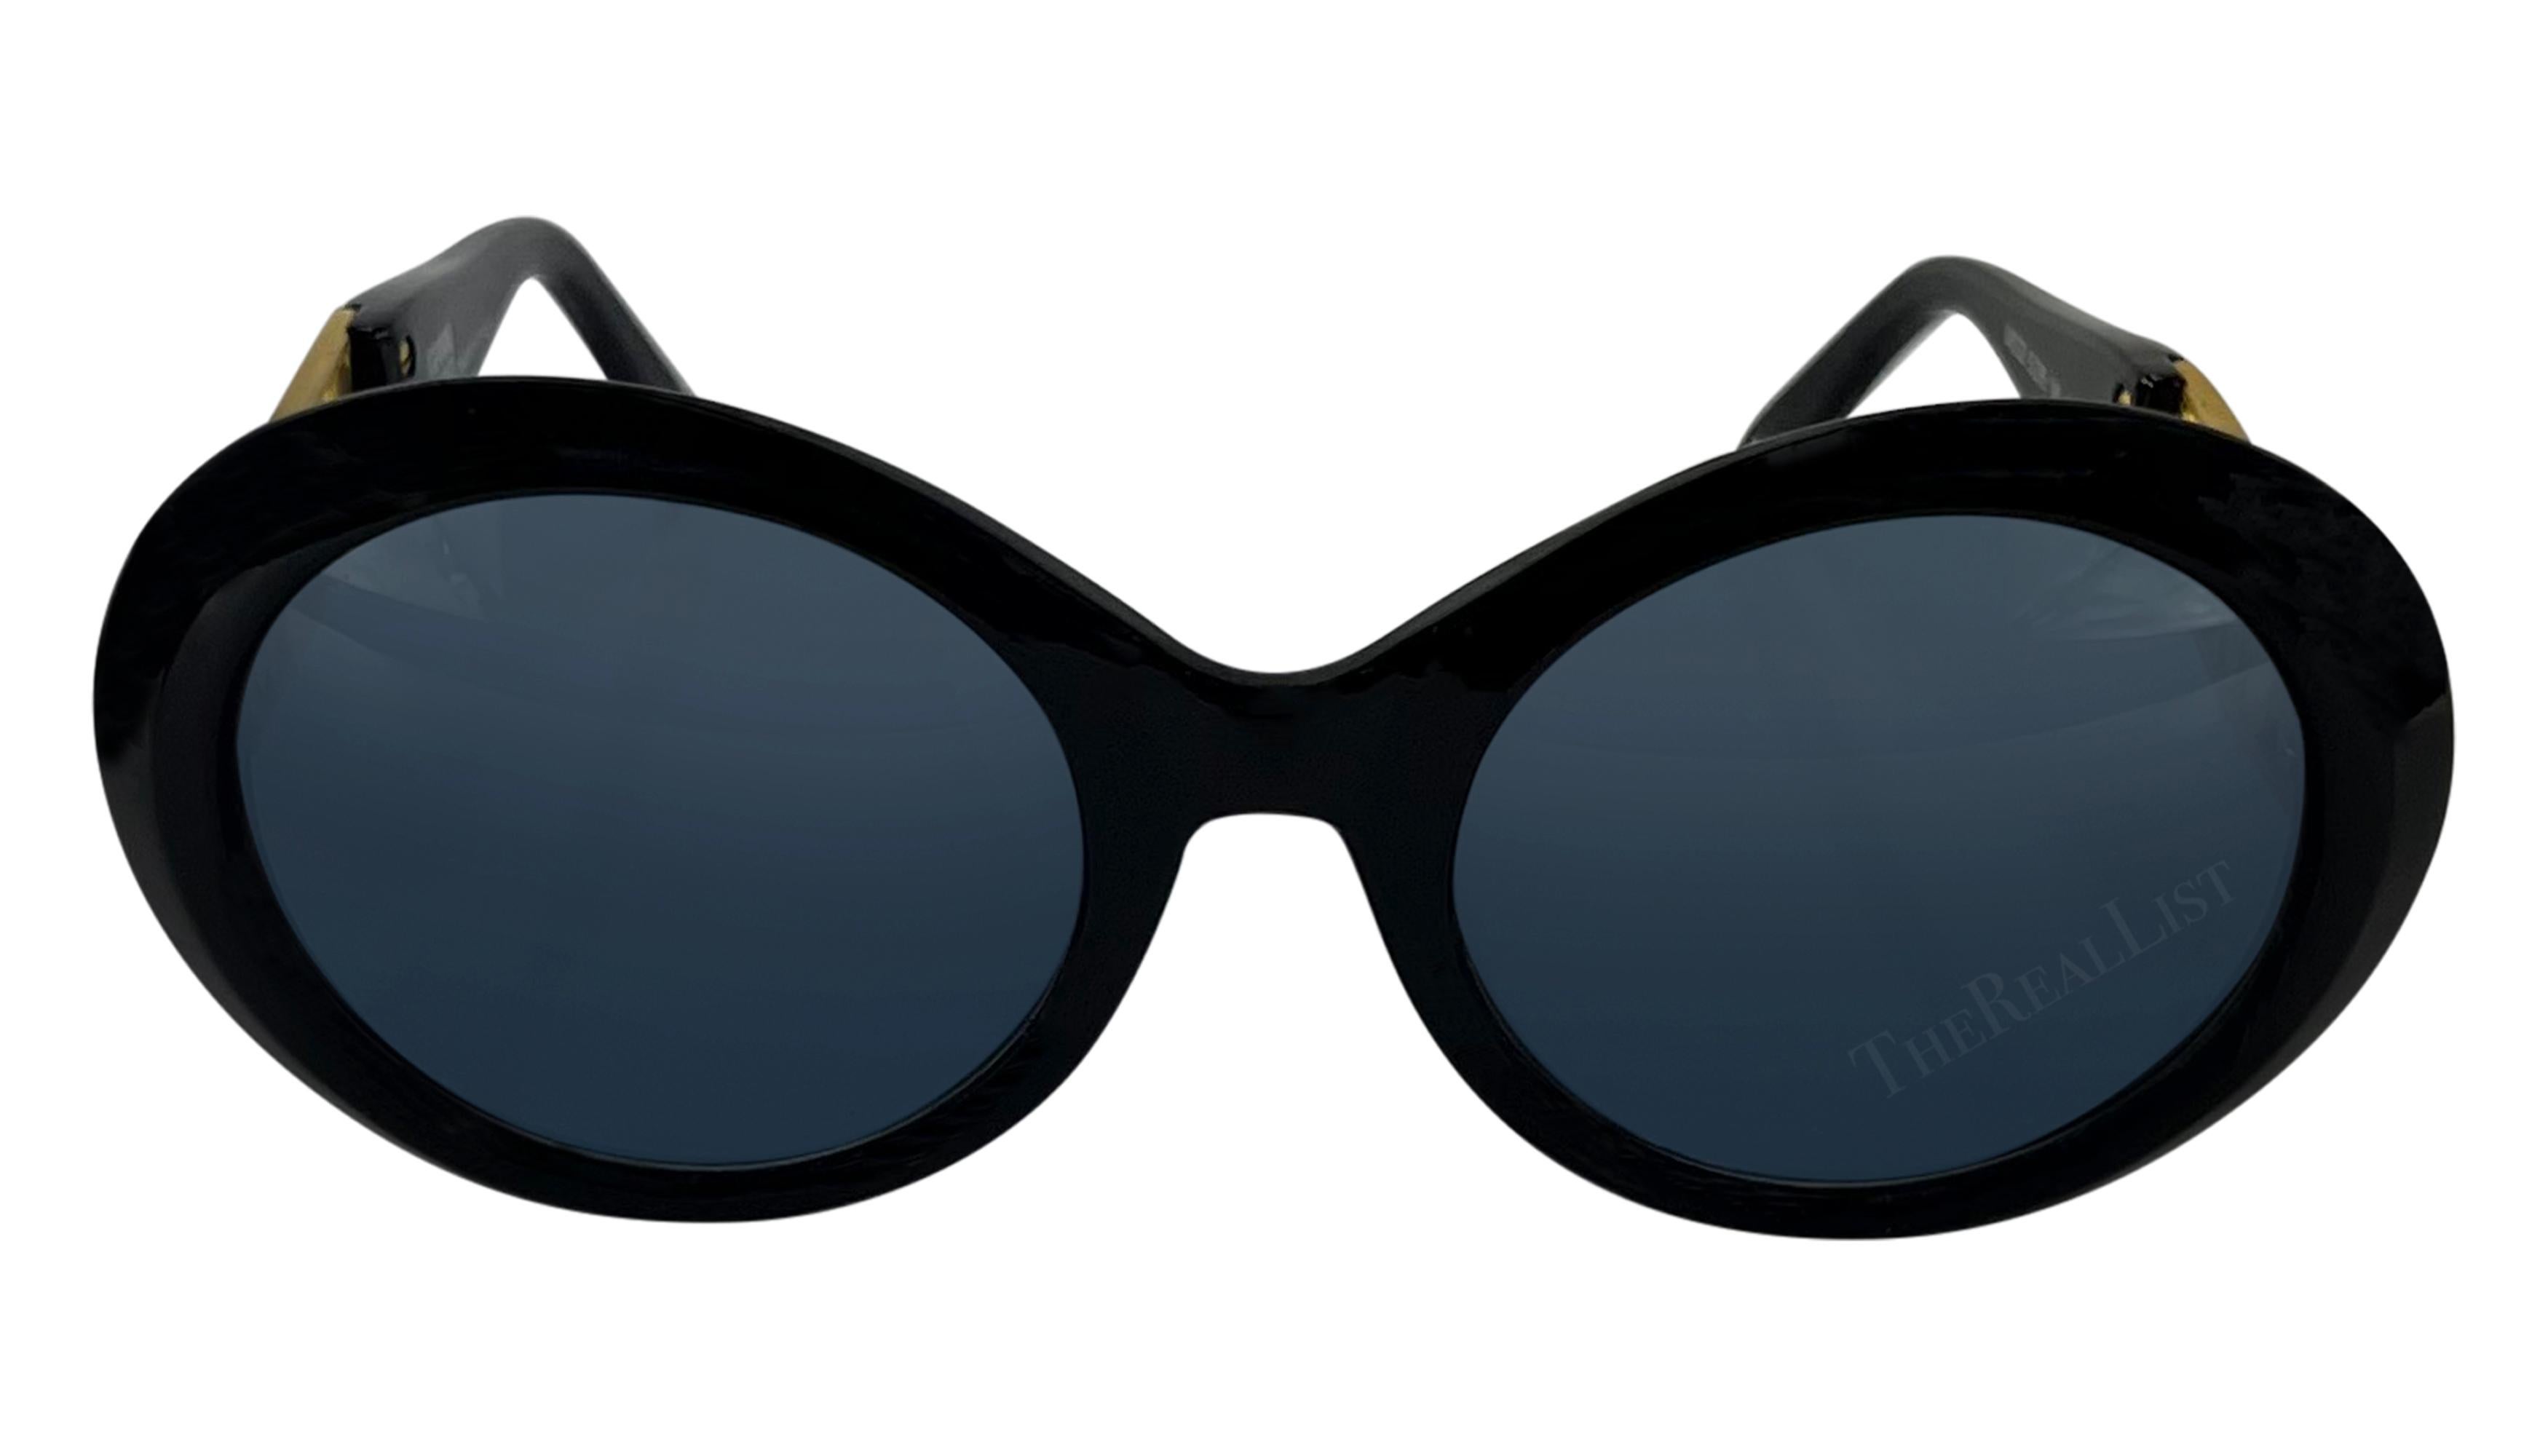 These oversized black round sunglasses, part of the Spring/Summer 1993 collection, were designed by Gianni Versace himself. Adorned with gold-tone 'Miami' arms, they pay homage to Gianni's affection for the city. 

Approximate Measurements-
Frame